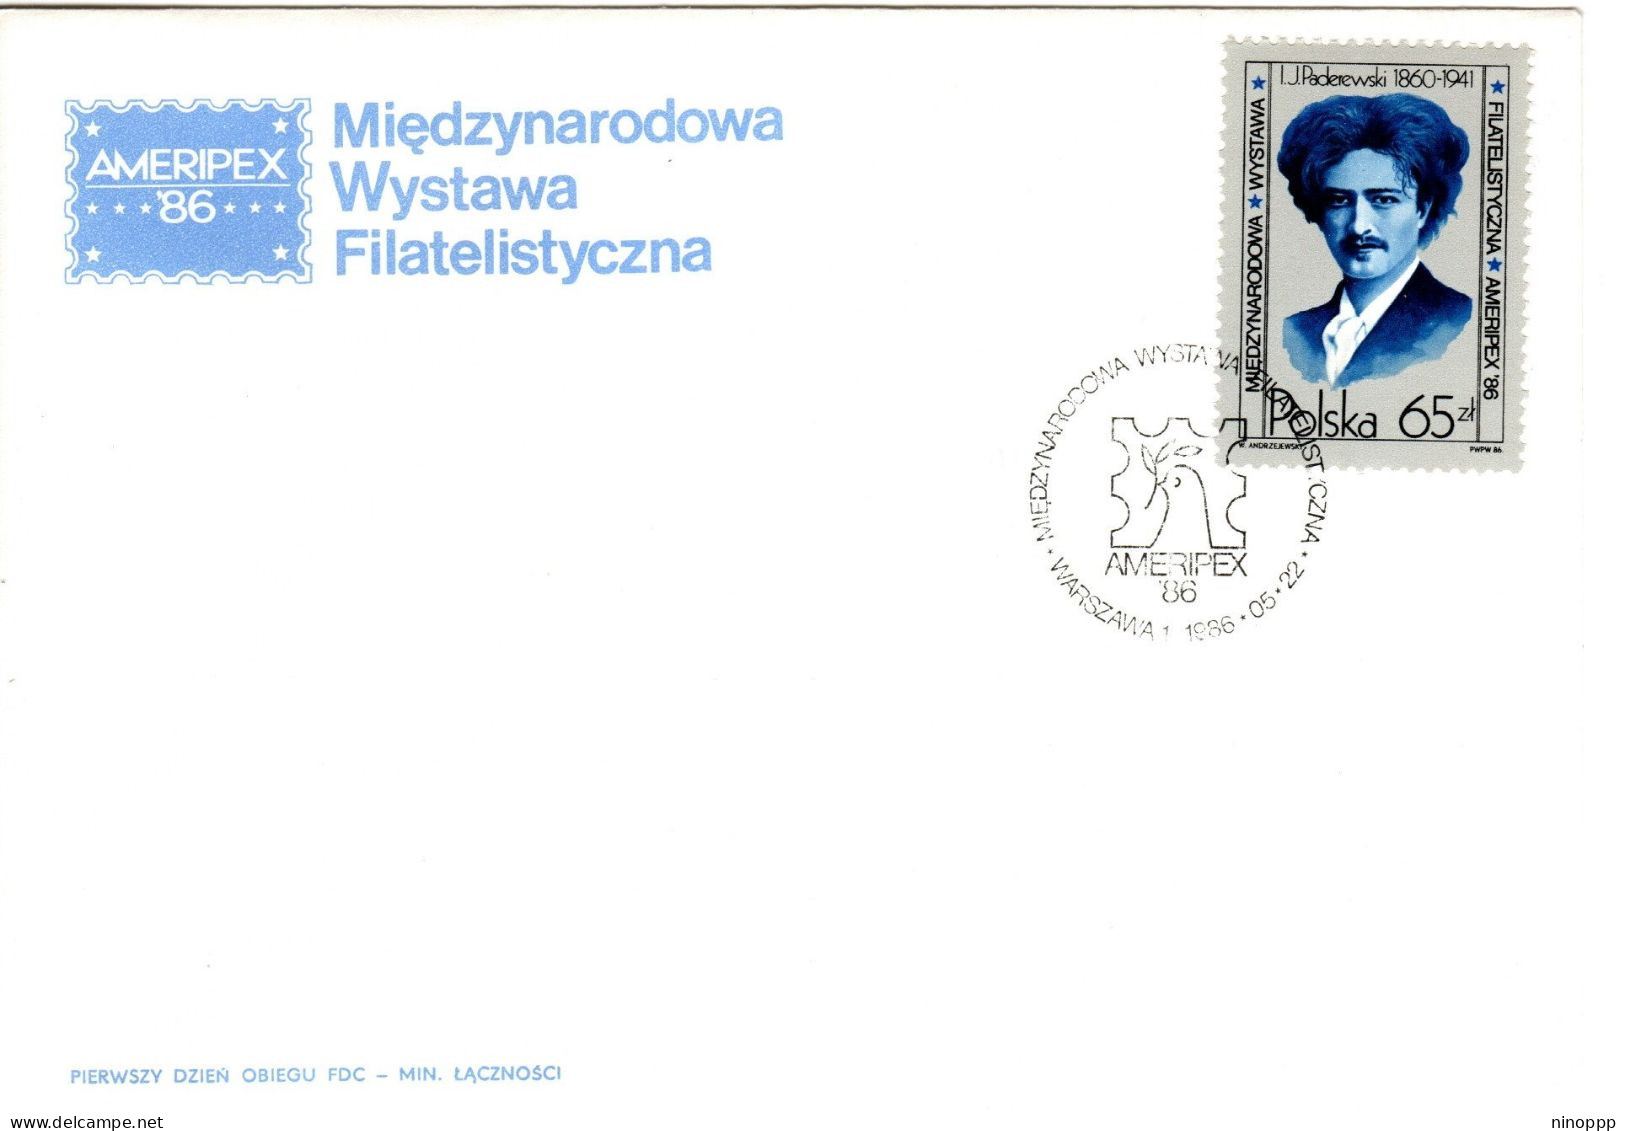 Poland 1986 Ameripex 86, First Day Cover - FDC